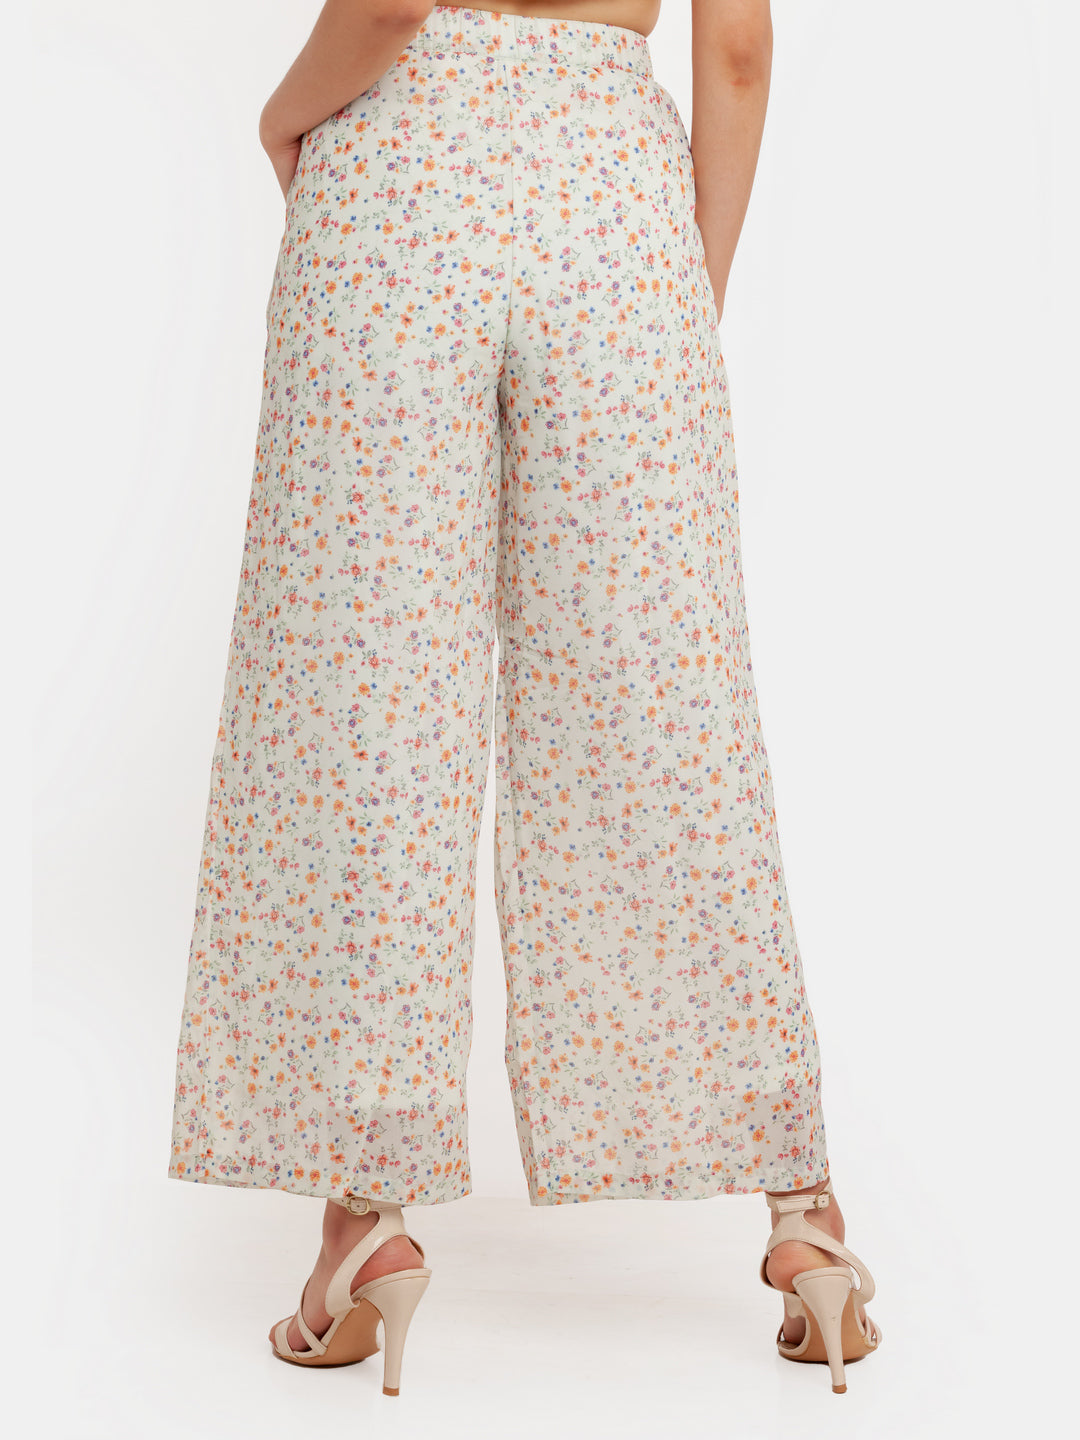 Gini London Lilac Linen-Look Belted Wide Leg Trousers | New Look